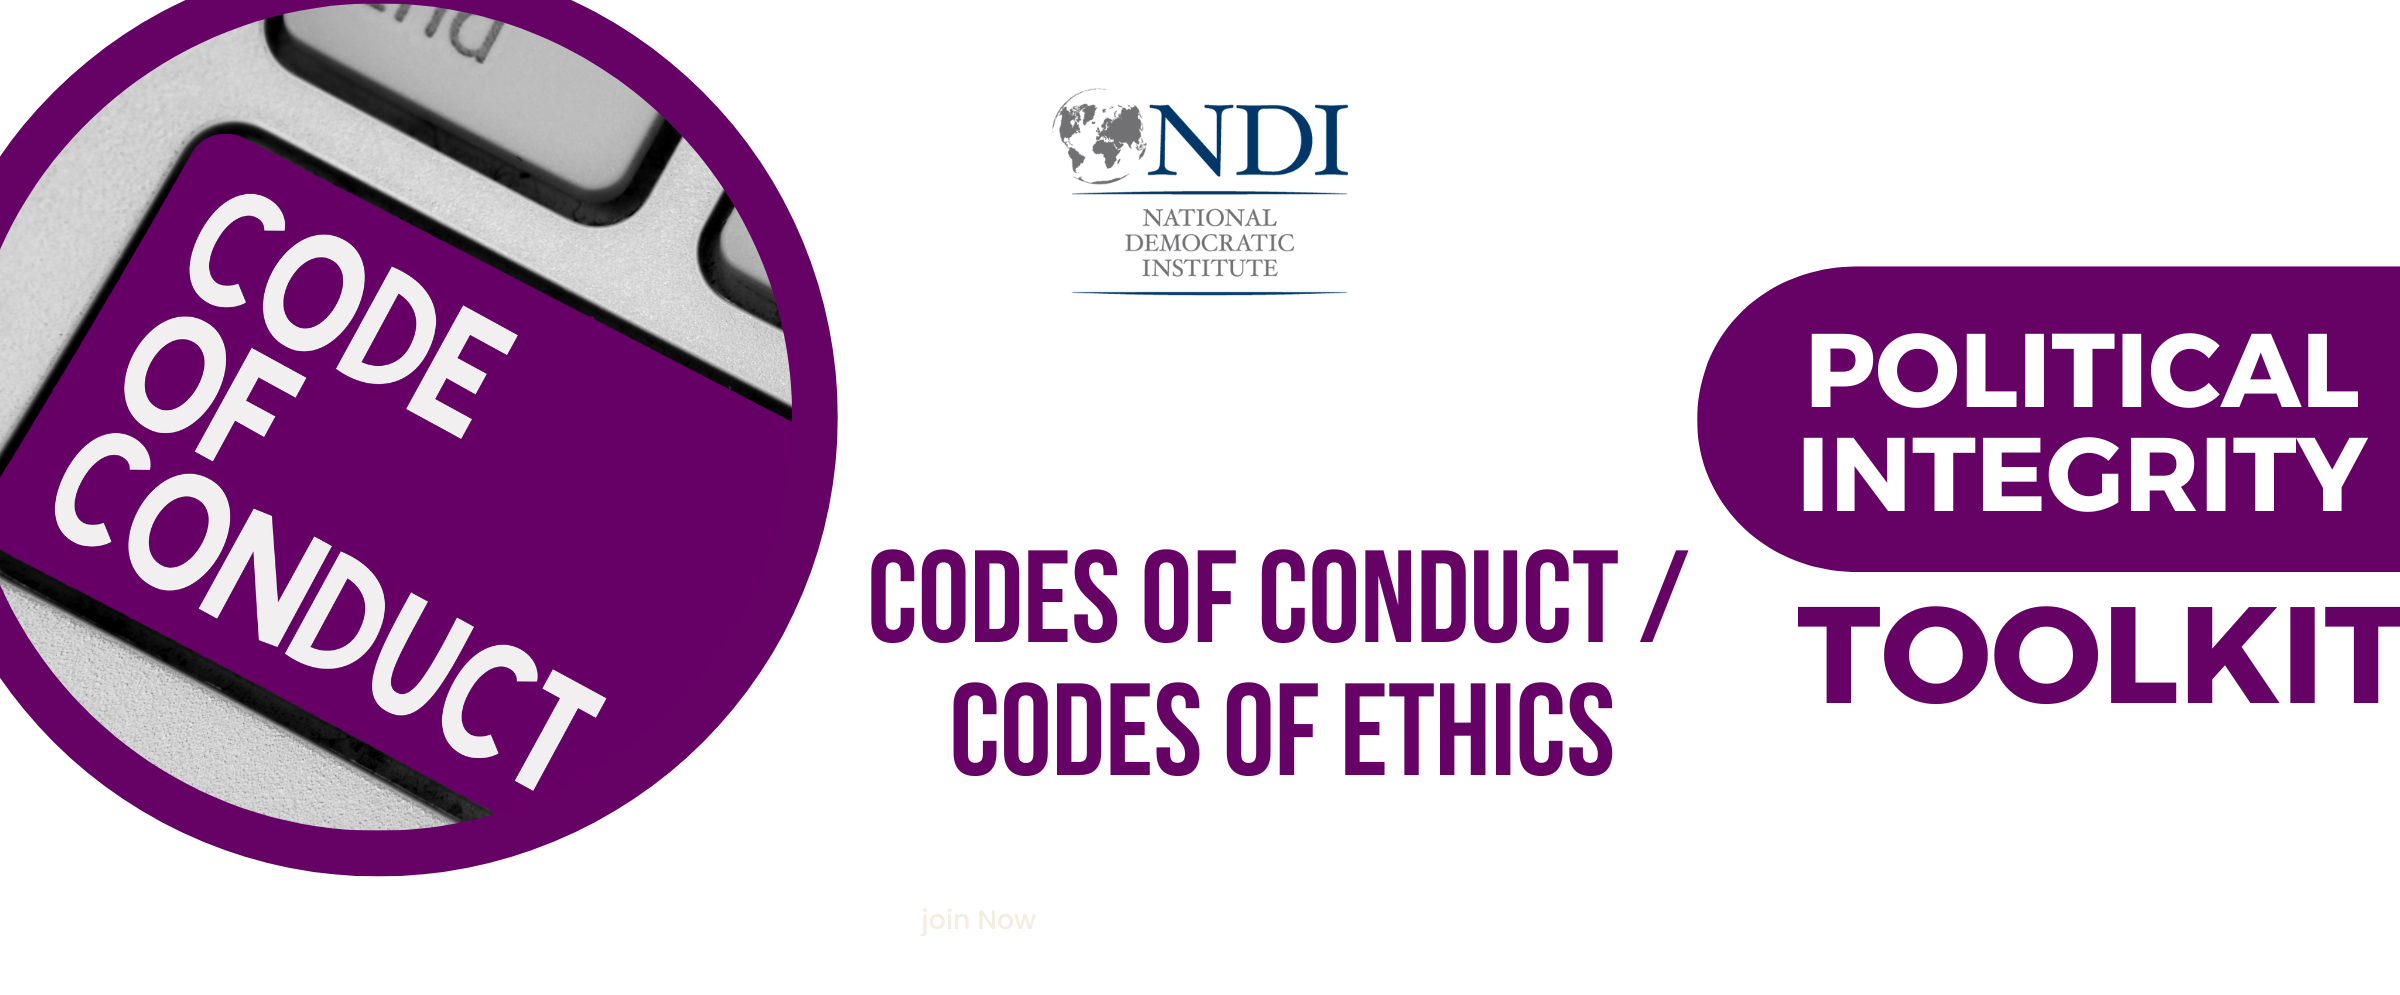 Codes of Conduct /  Codes of Ethics